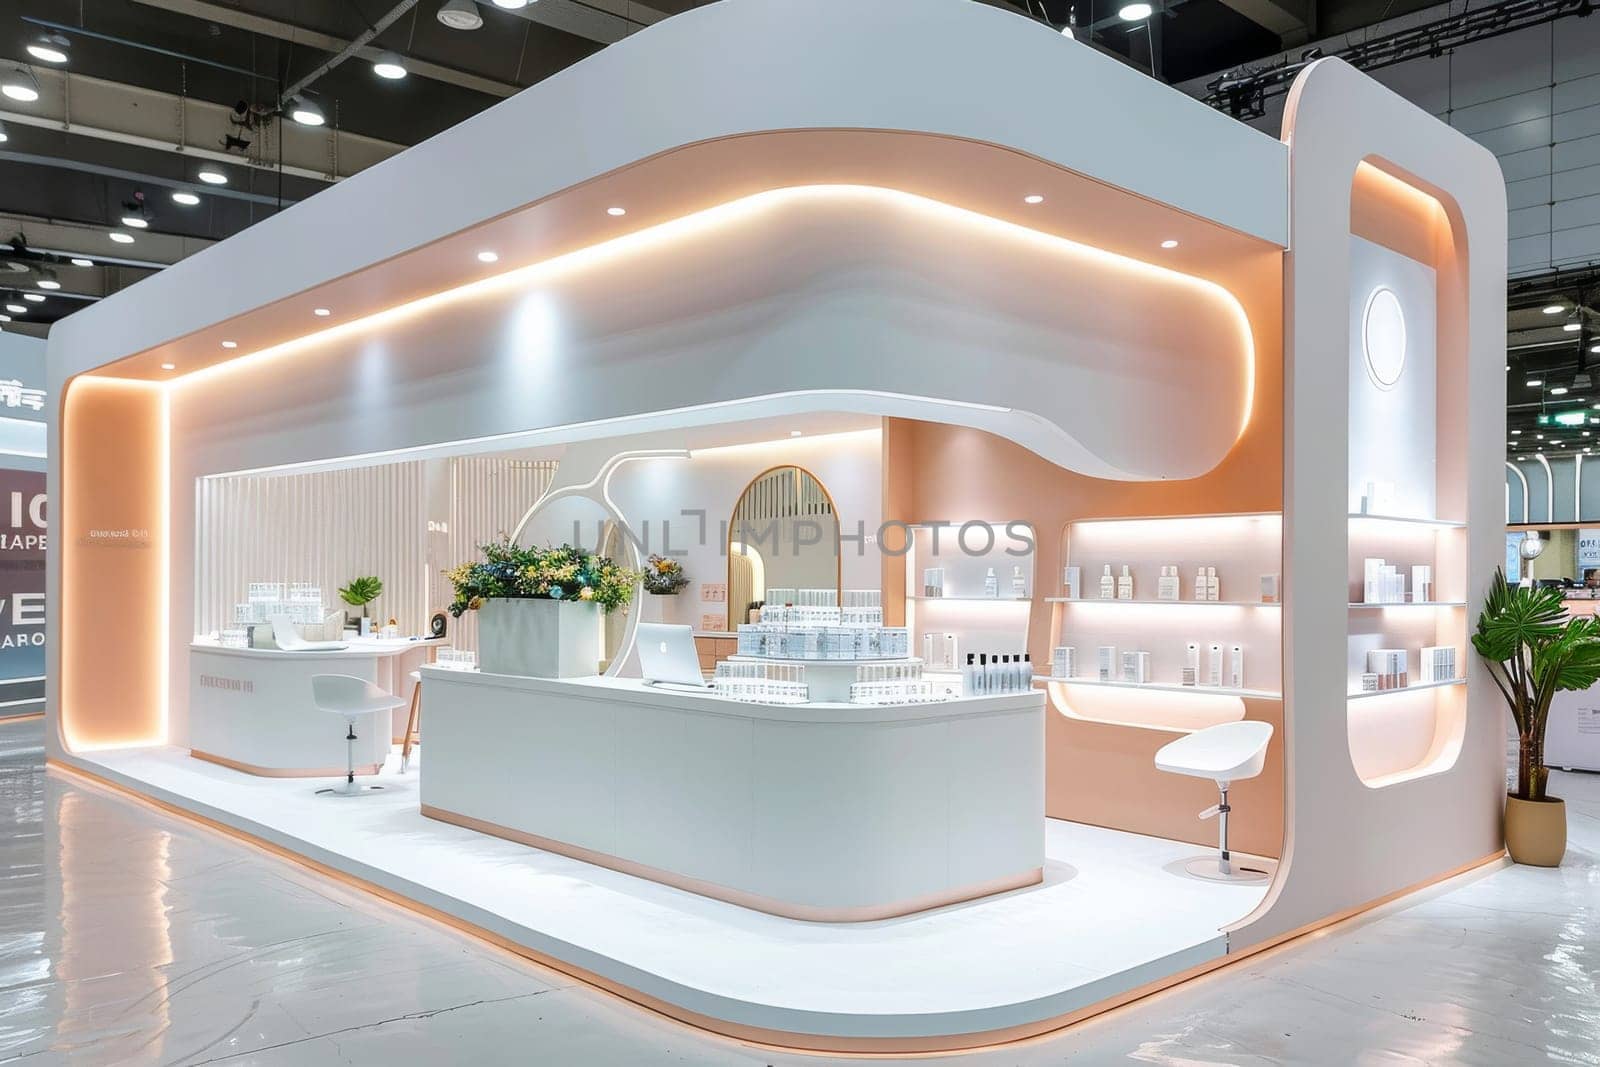 Luxury interior booth of cosmetic product by itchaznong